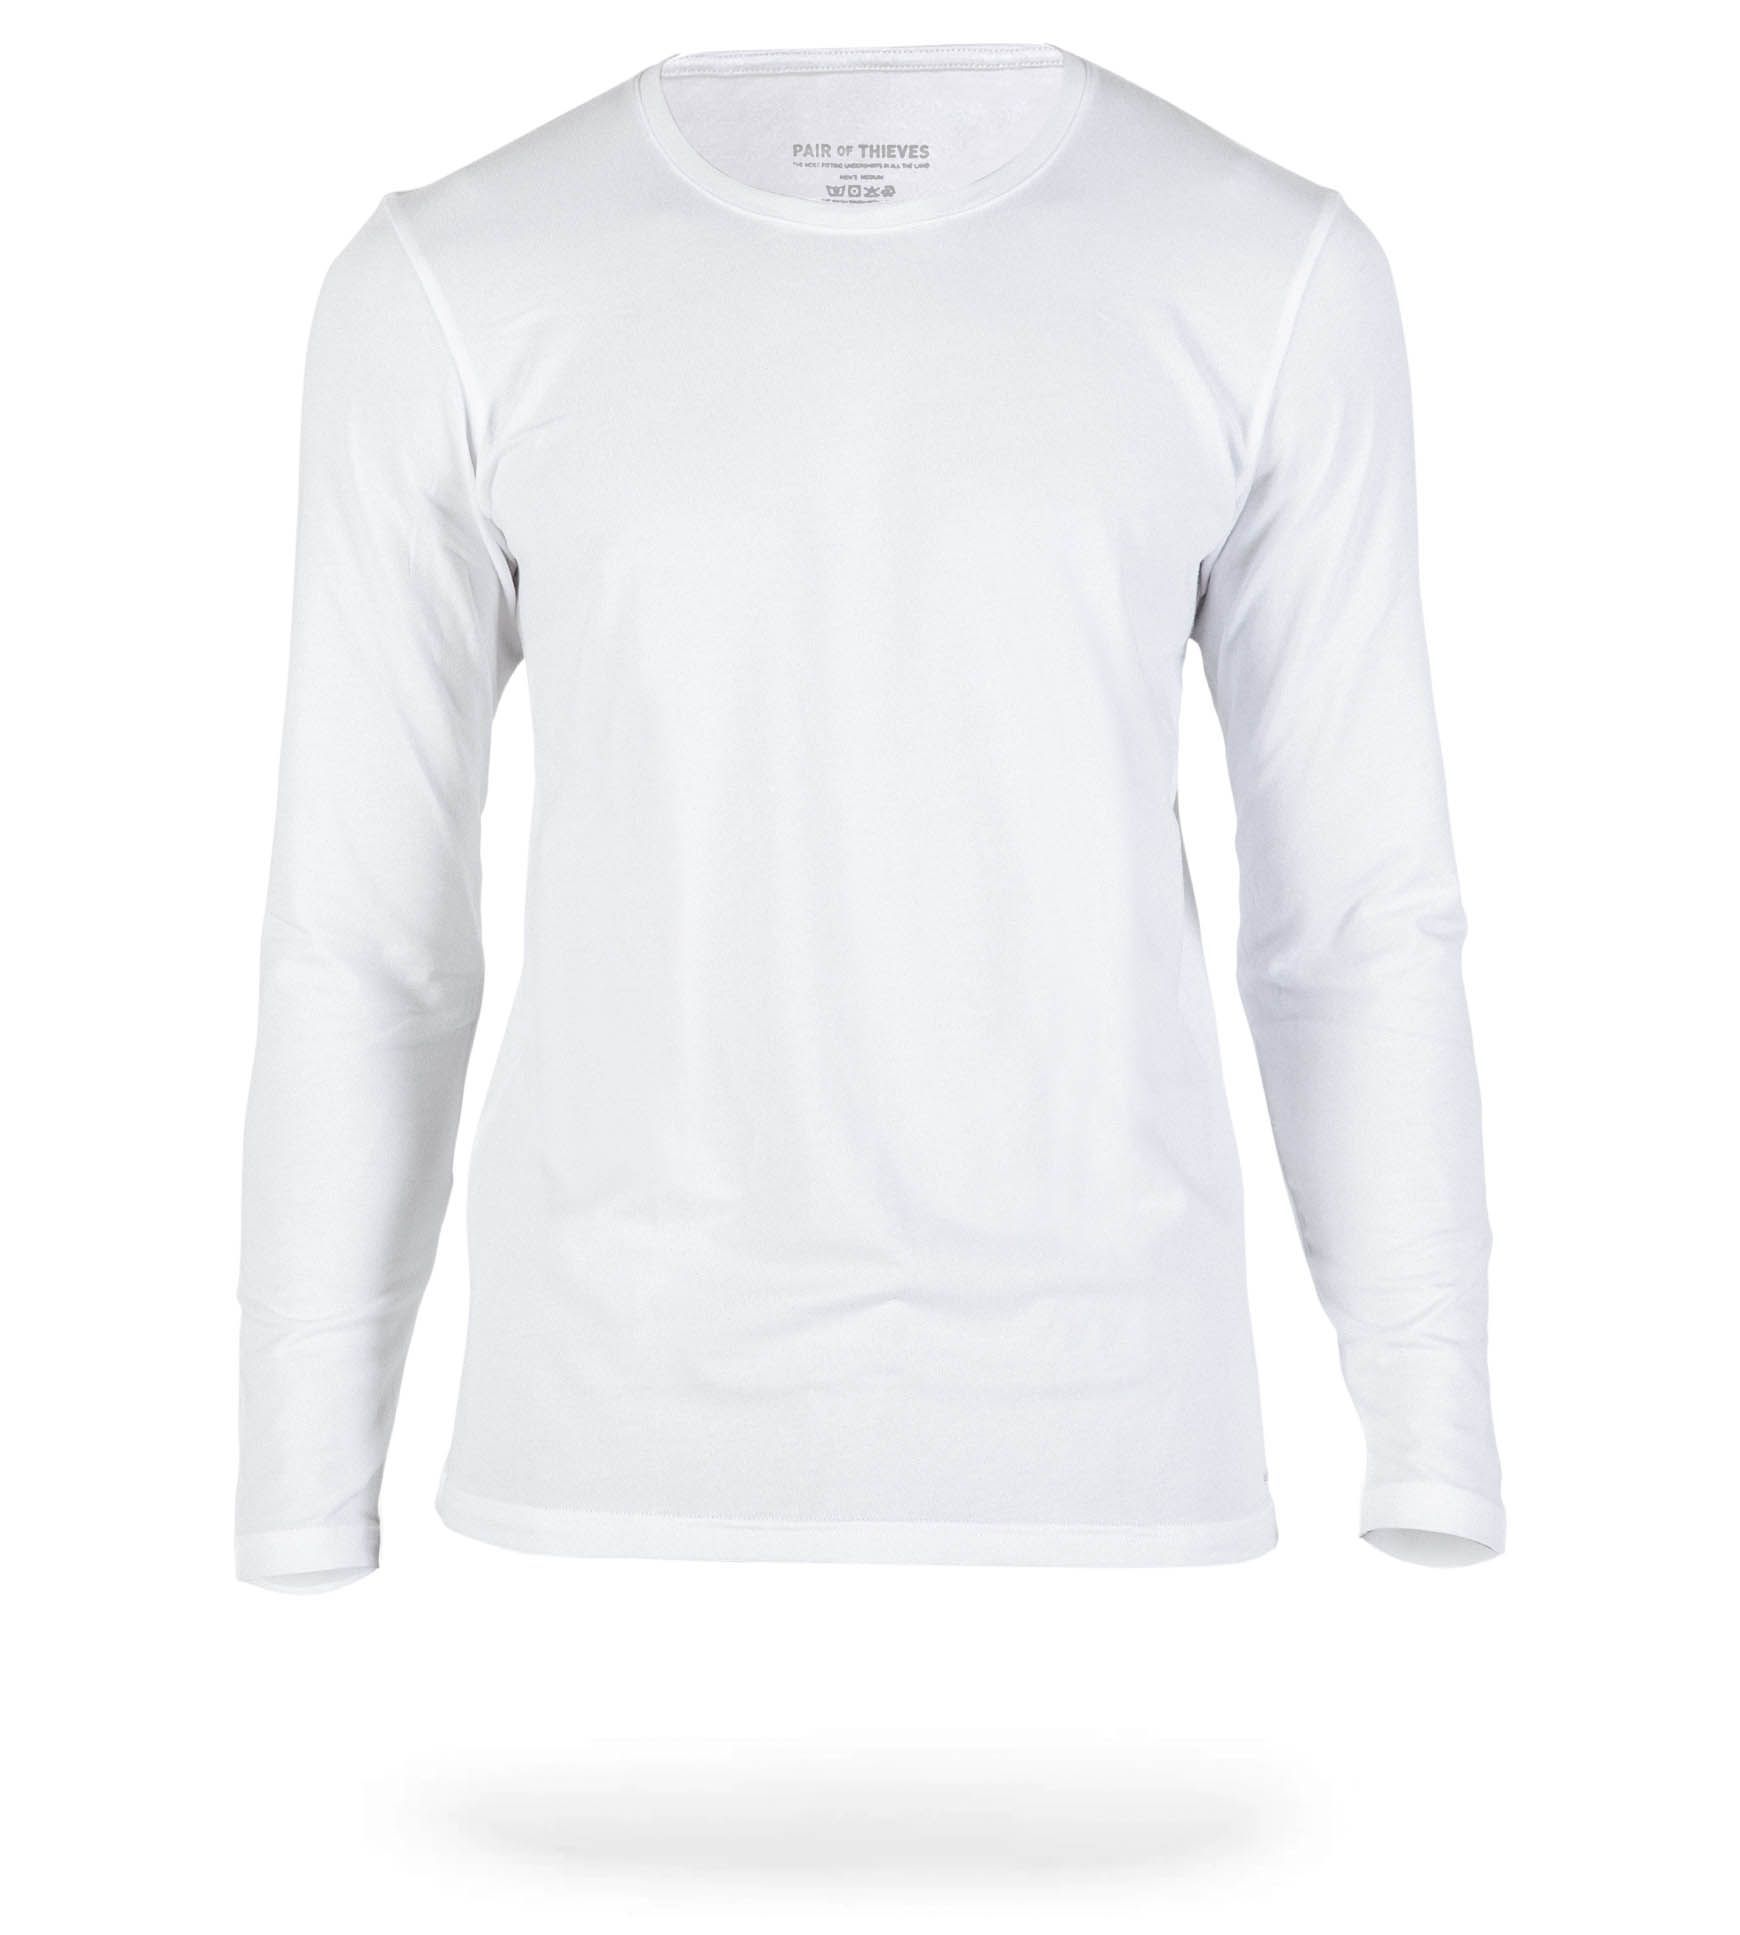 White SuperSoft Long Sleeve Crew Neck Tee – Pair of Thieves